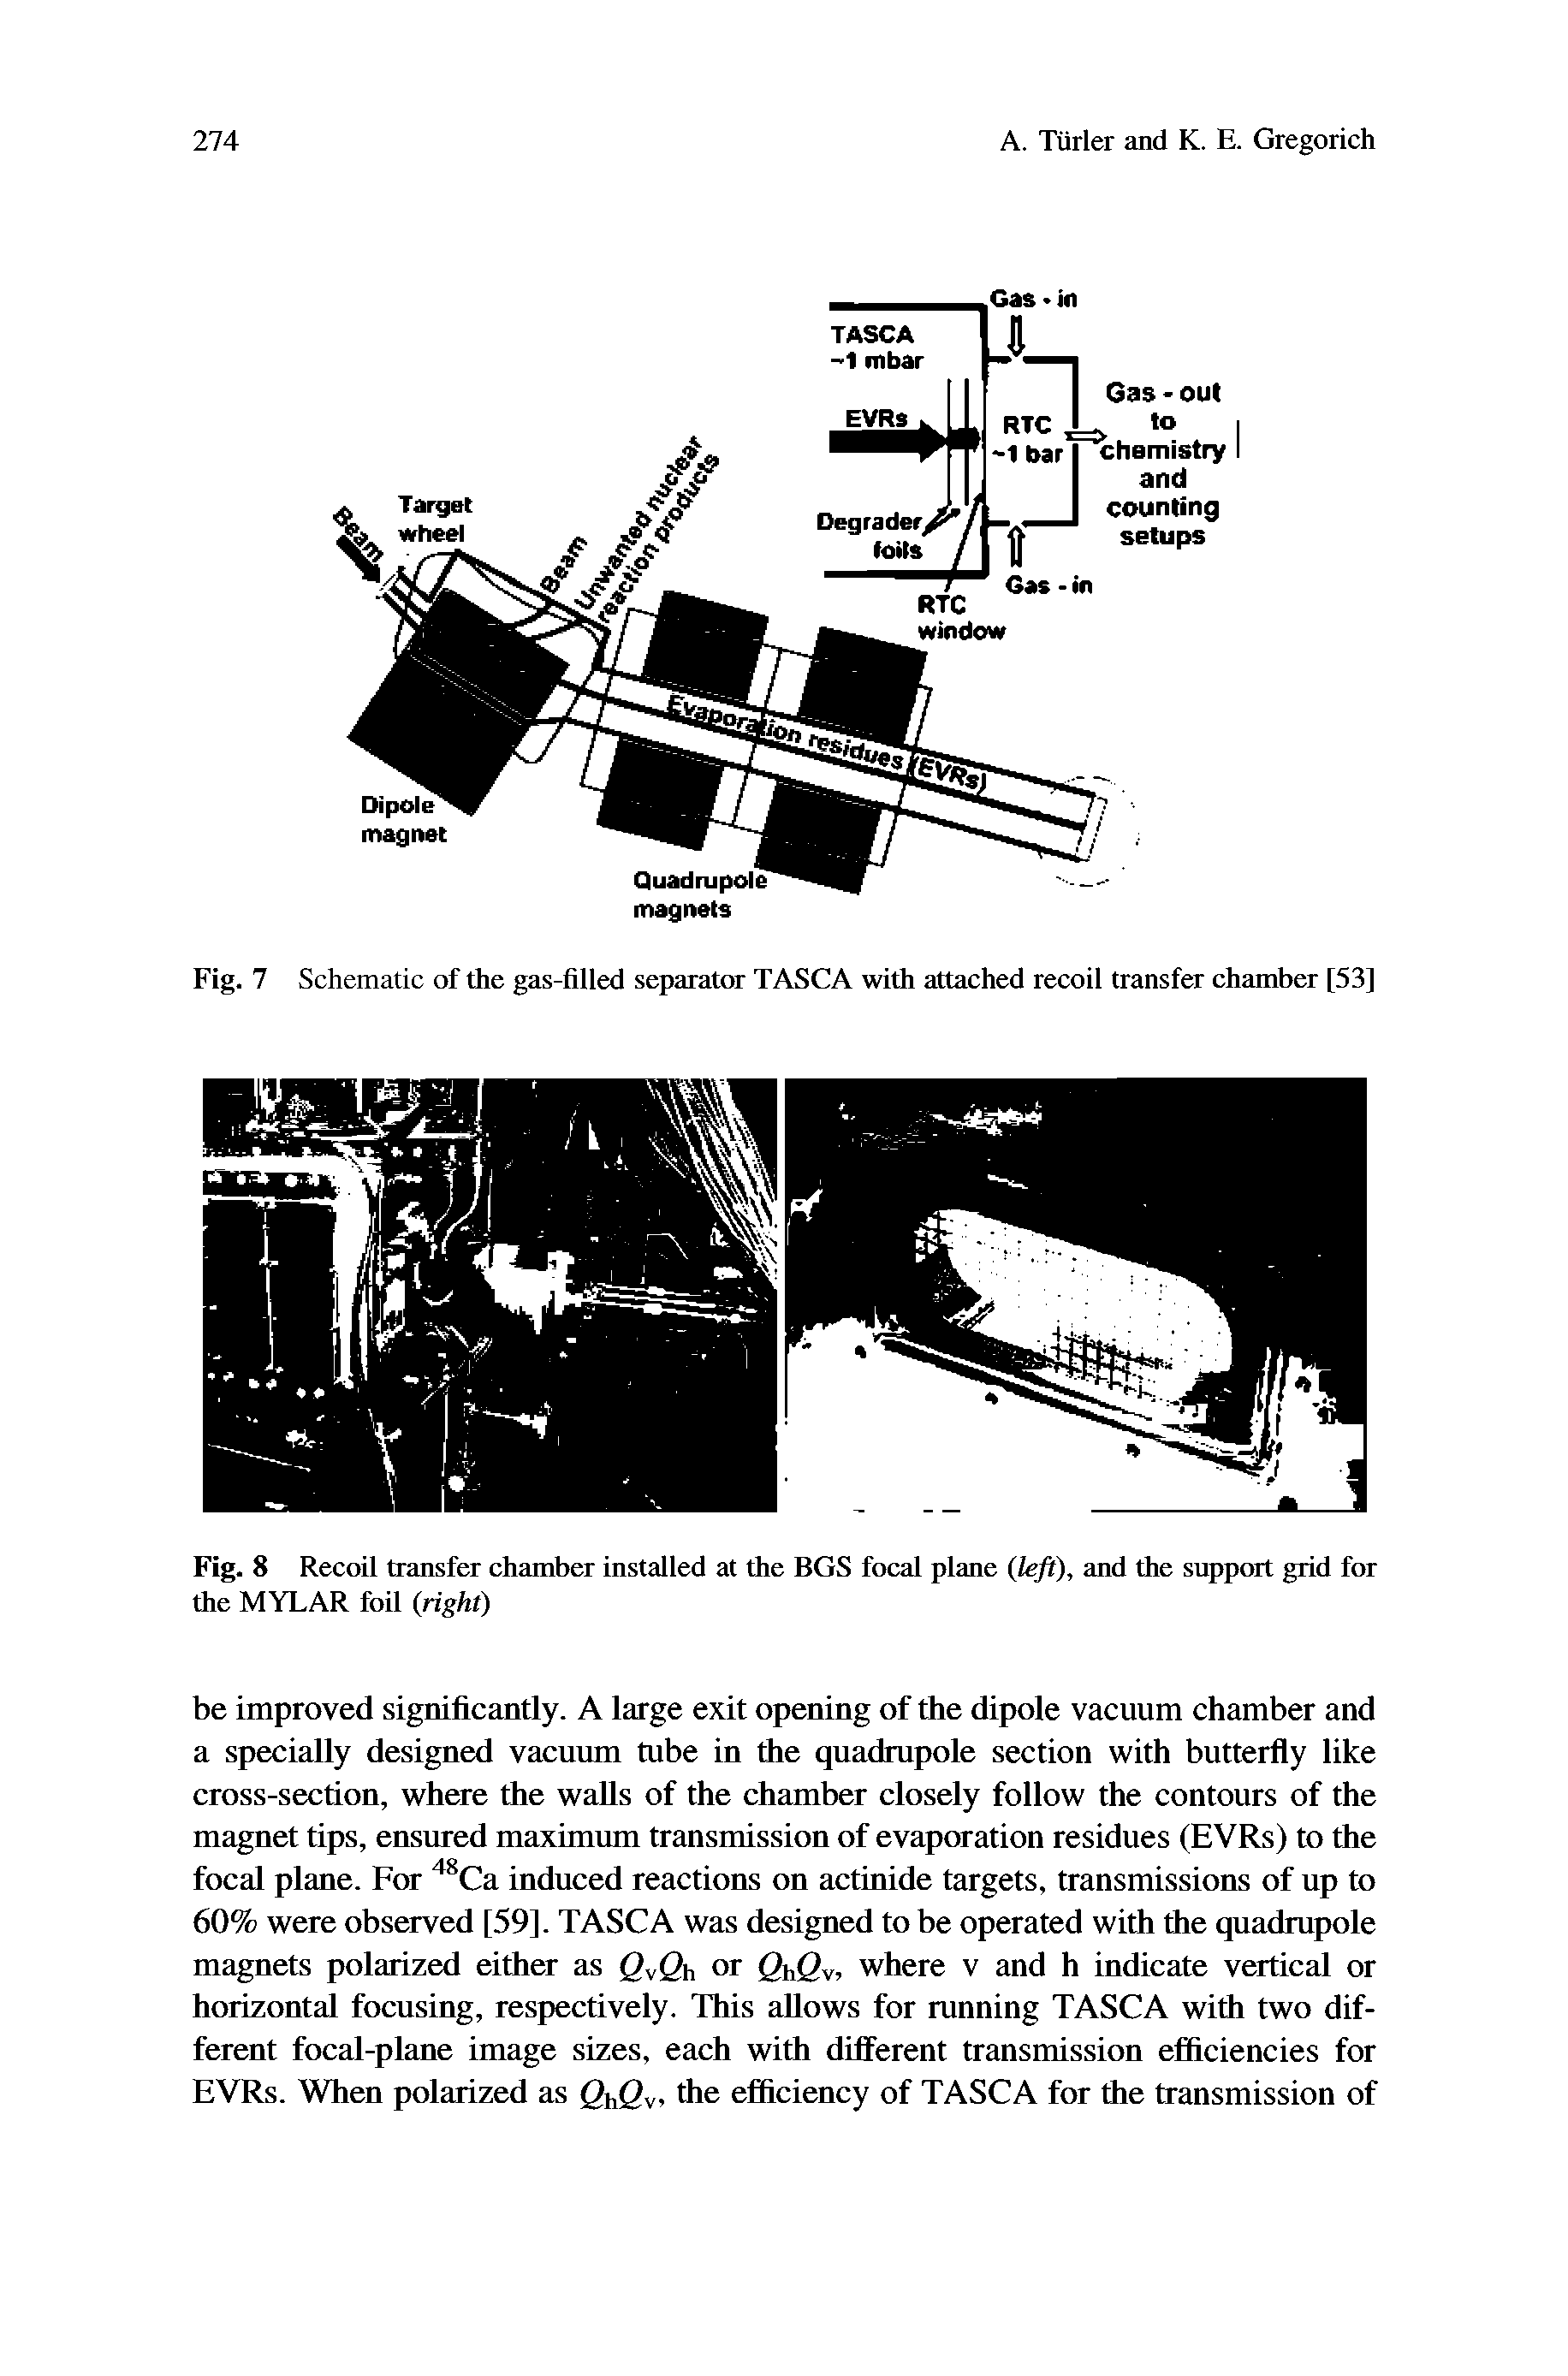 Fig. 7 Schematic of the gas-filled separator TASCA with attached recoil transfer chamber [53]...